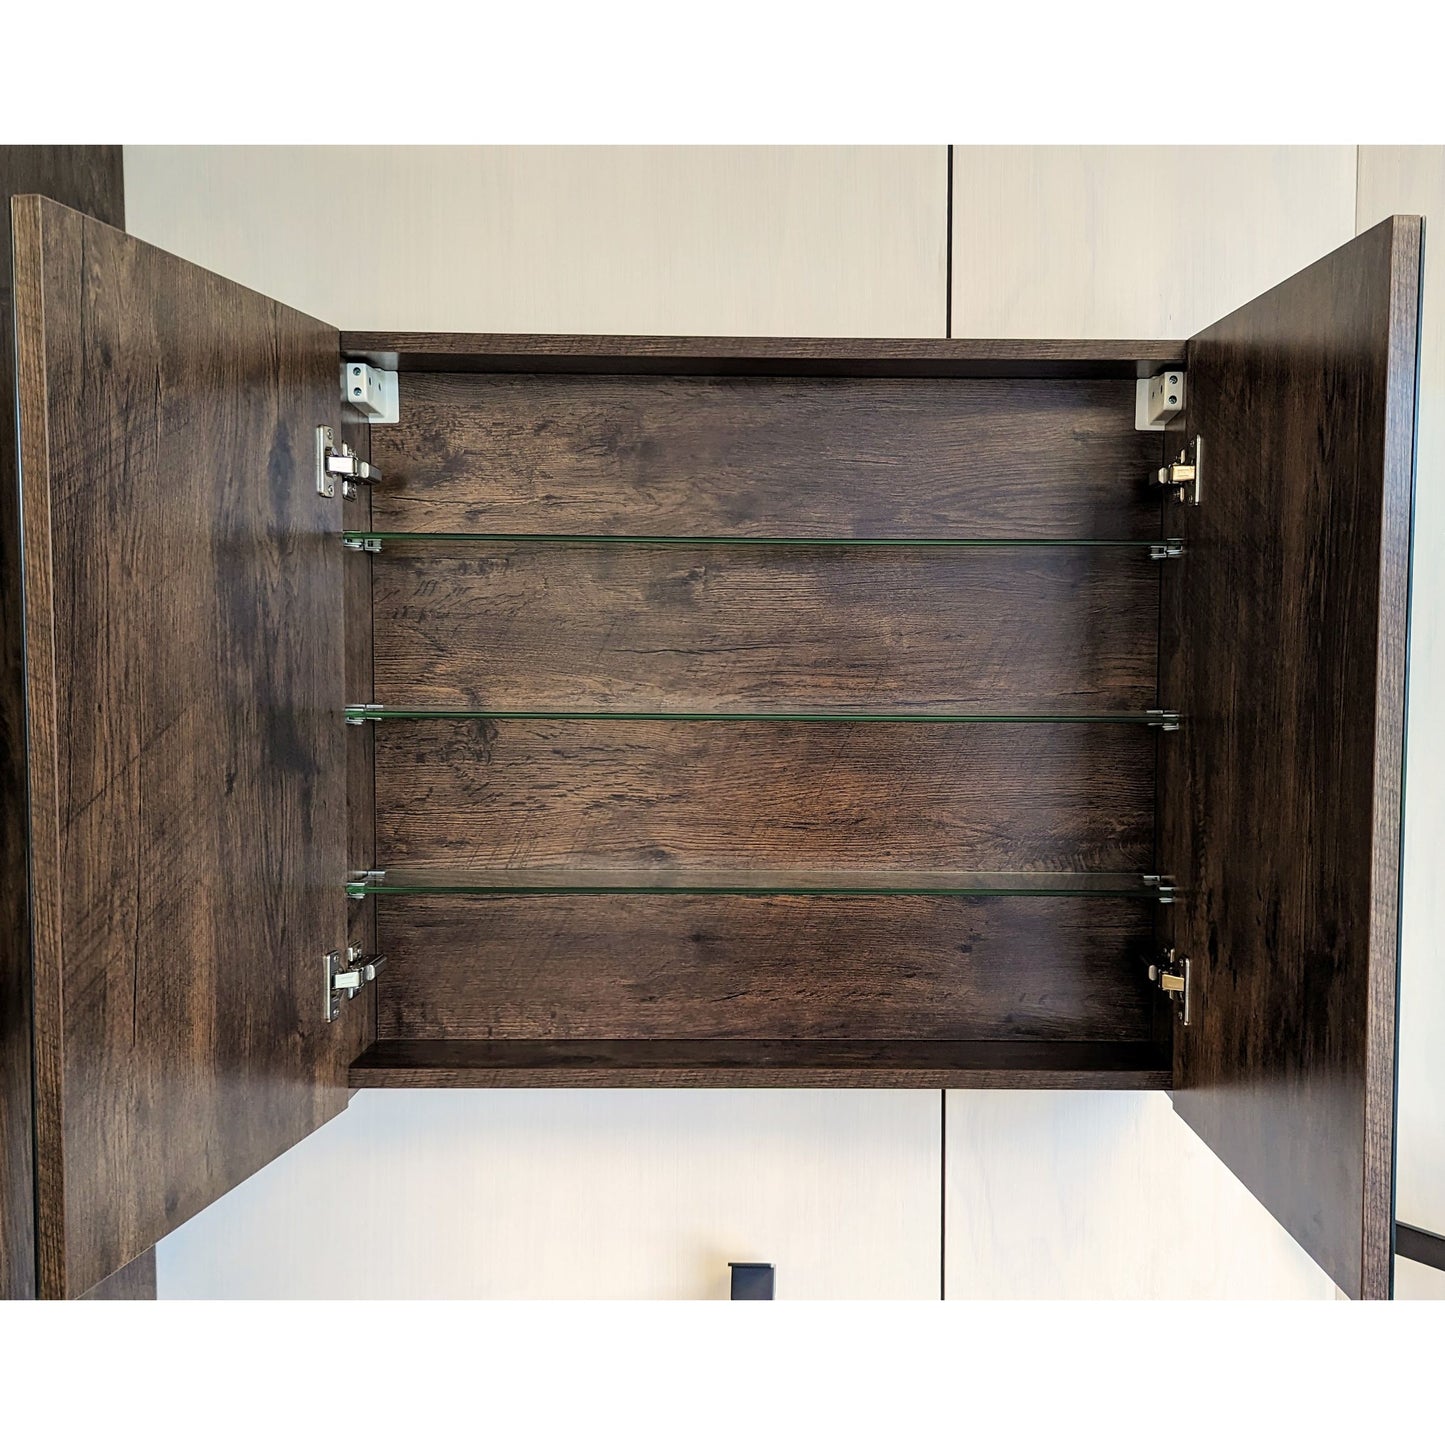 Austin Range Bathroom Mirror Cabinet with an LED Light Rosewood Color - 600mm